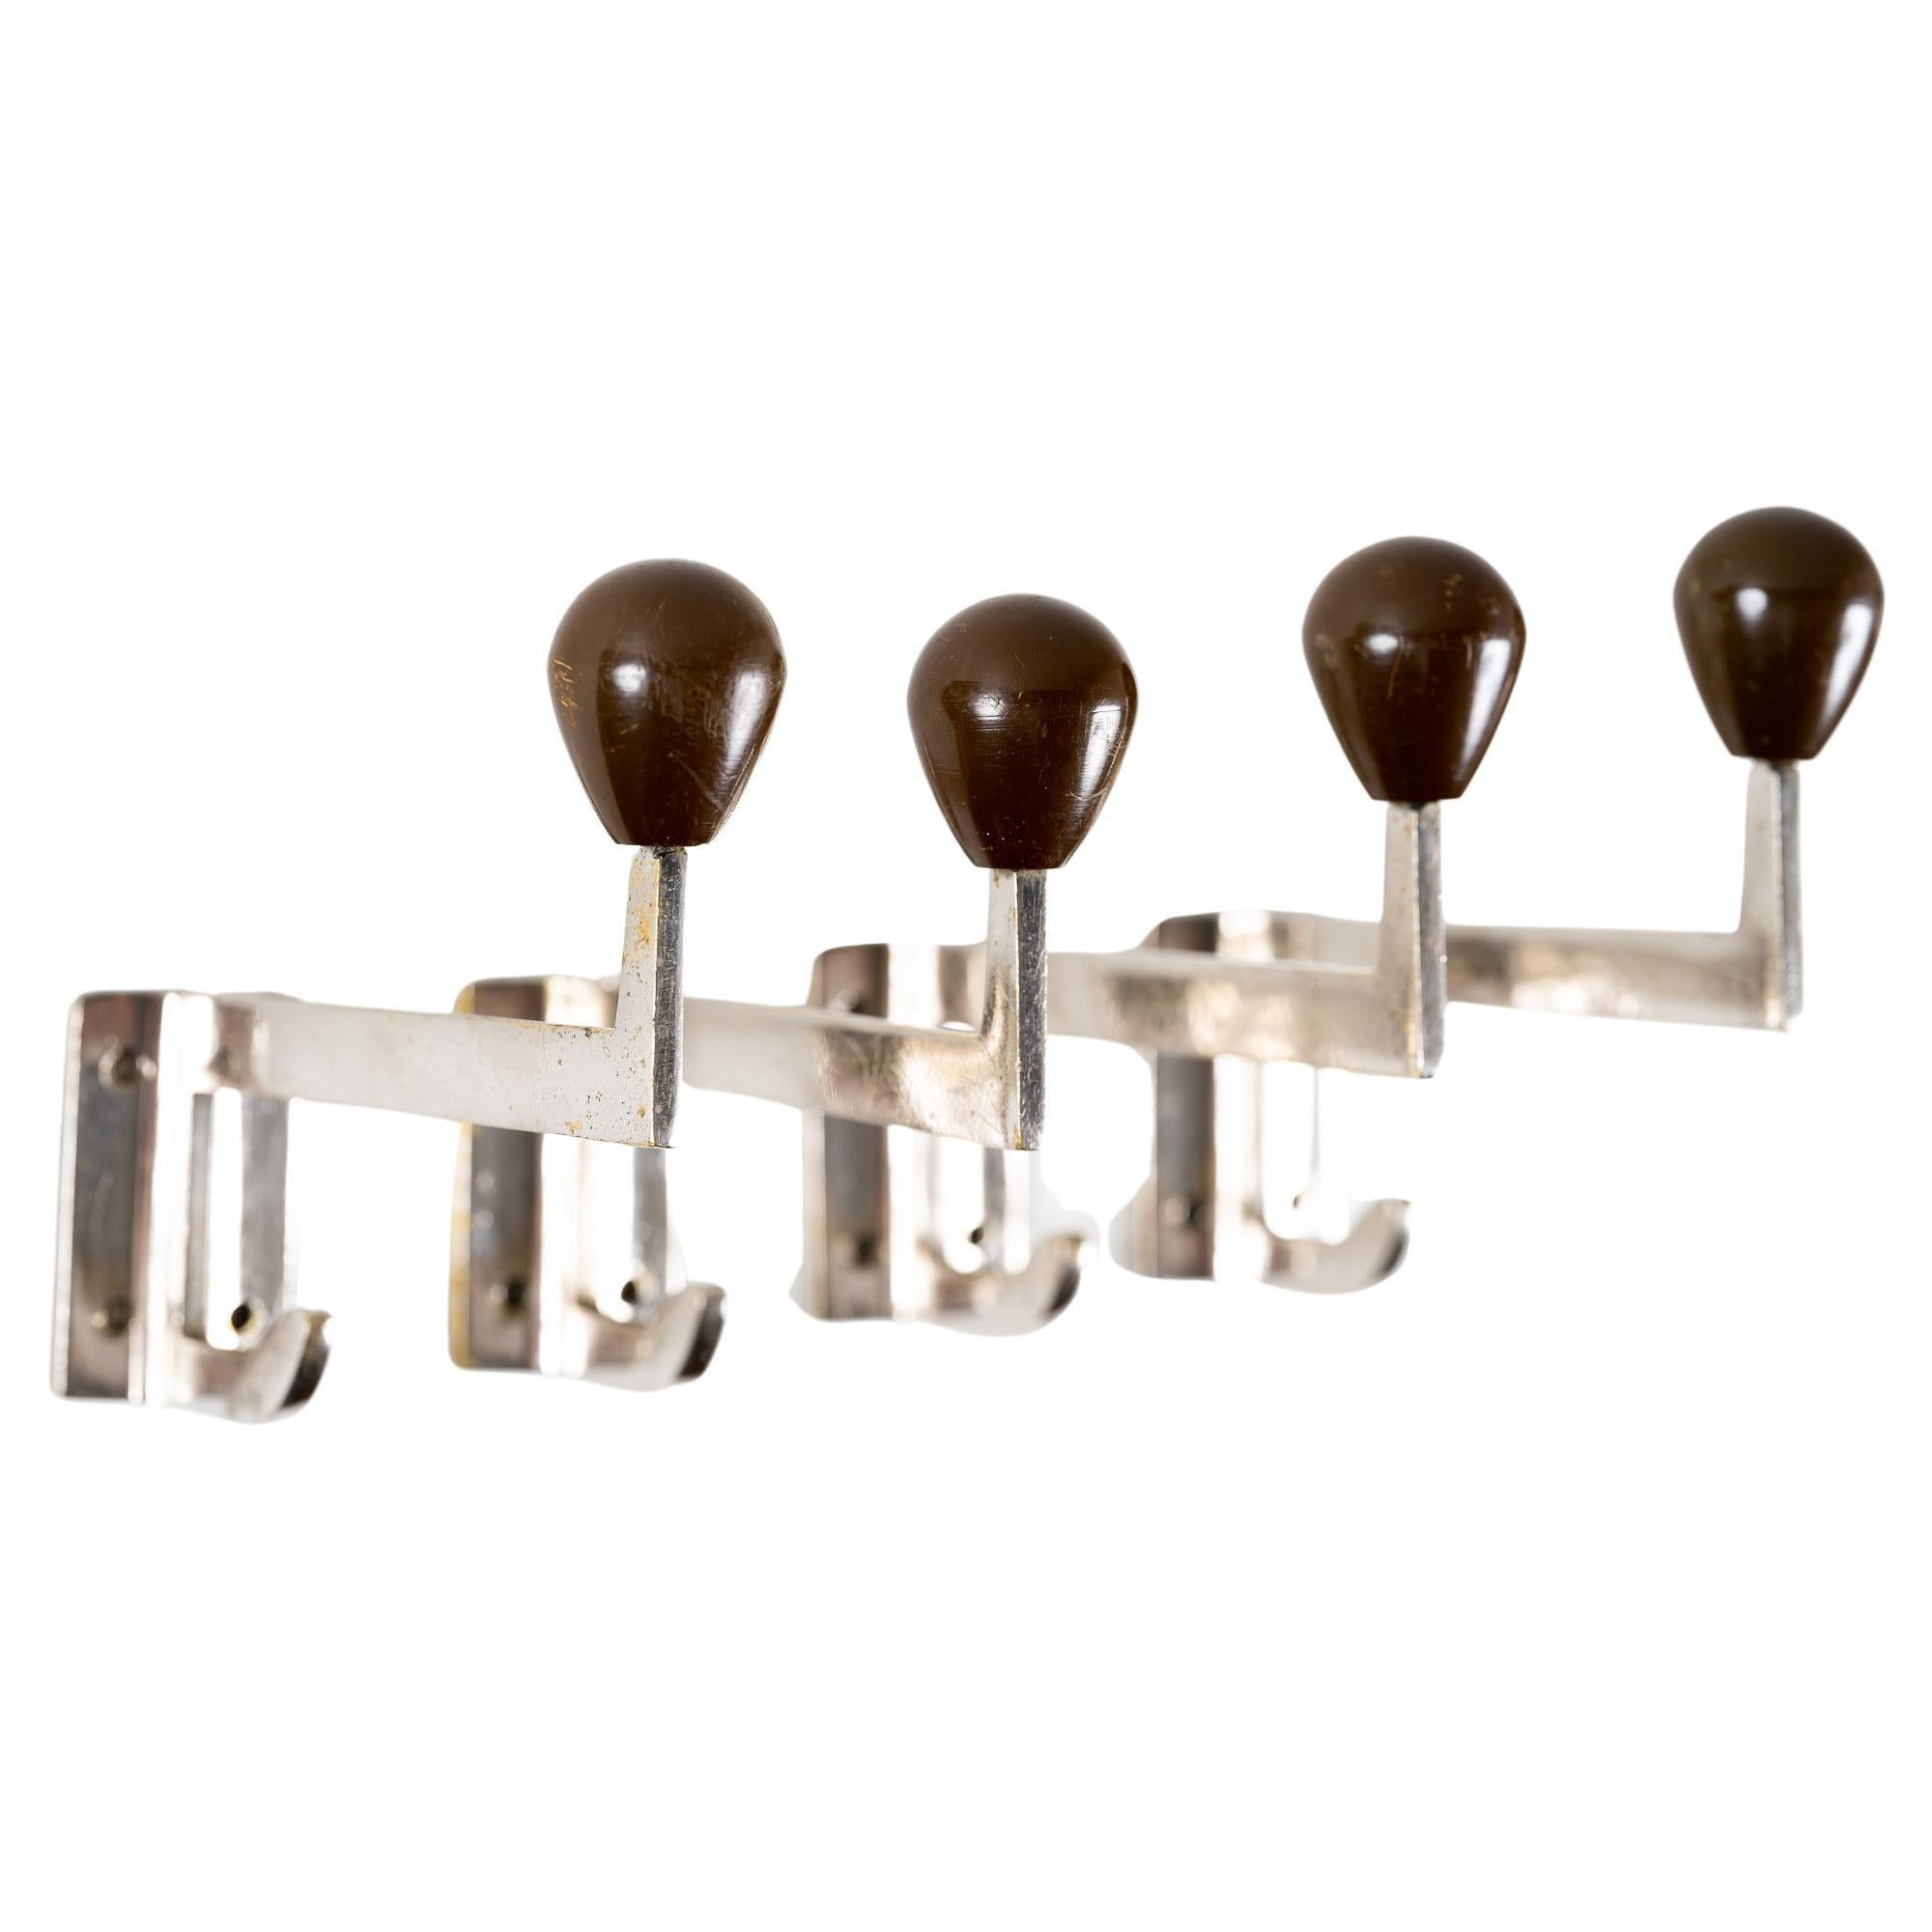 4 Art Deco Nickel-Plated Wall Hooks with Wooden Ball Around 1920 For Sale